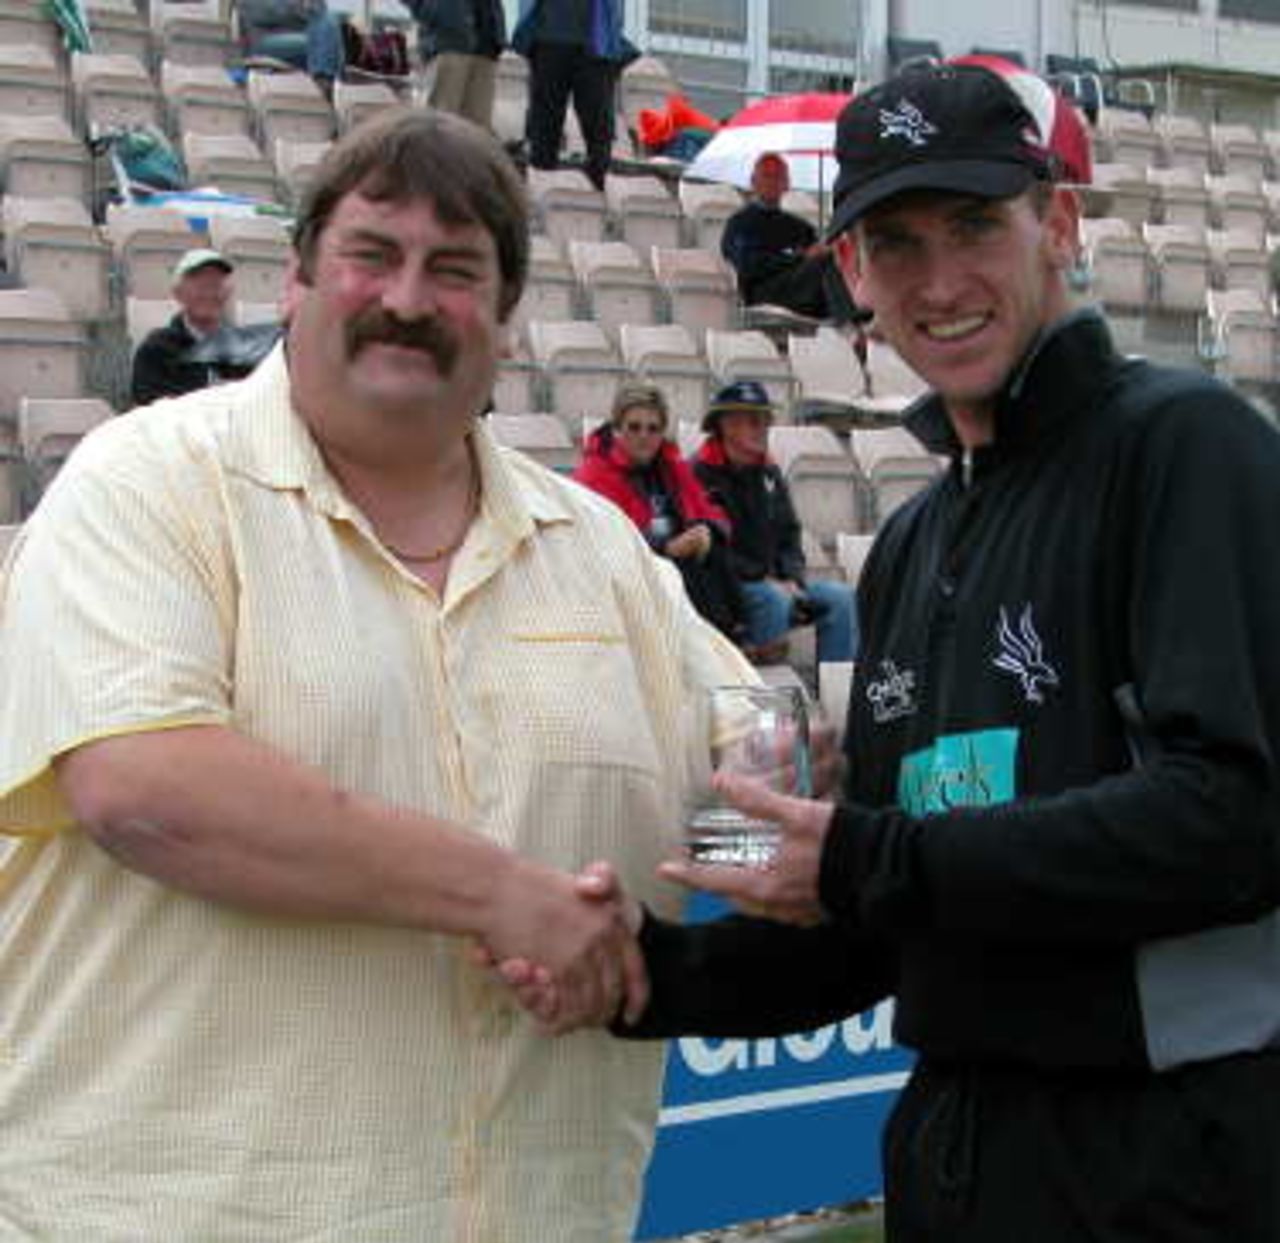 John Crawley receives the August Courage Player of the Month award for from Steve Smith.